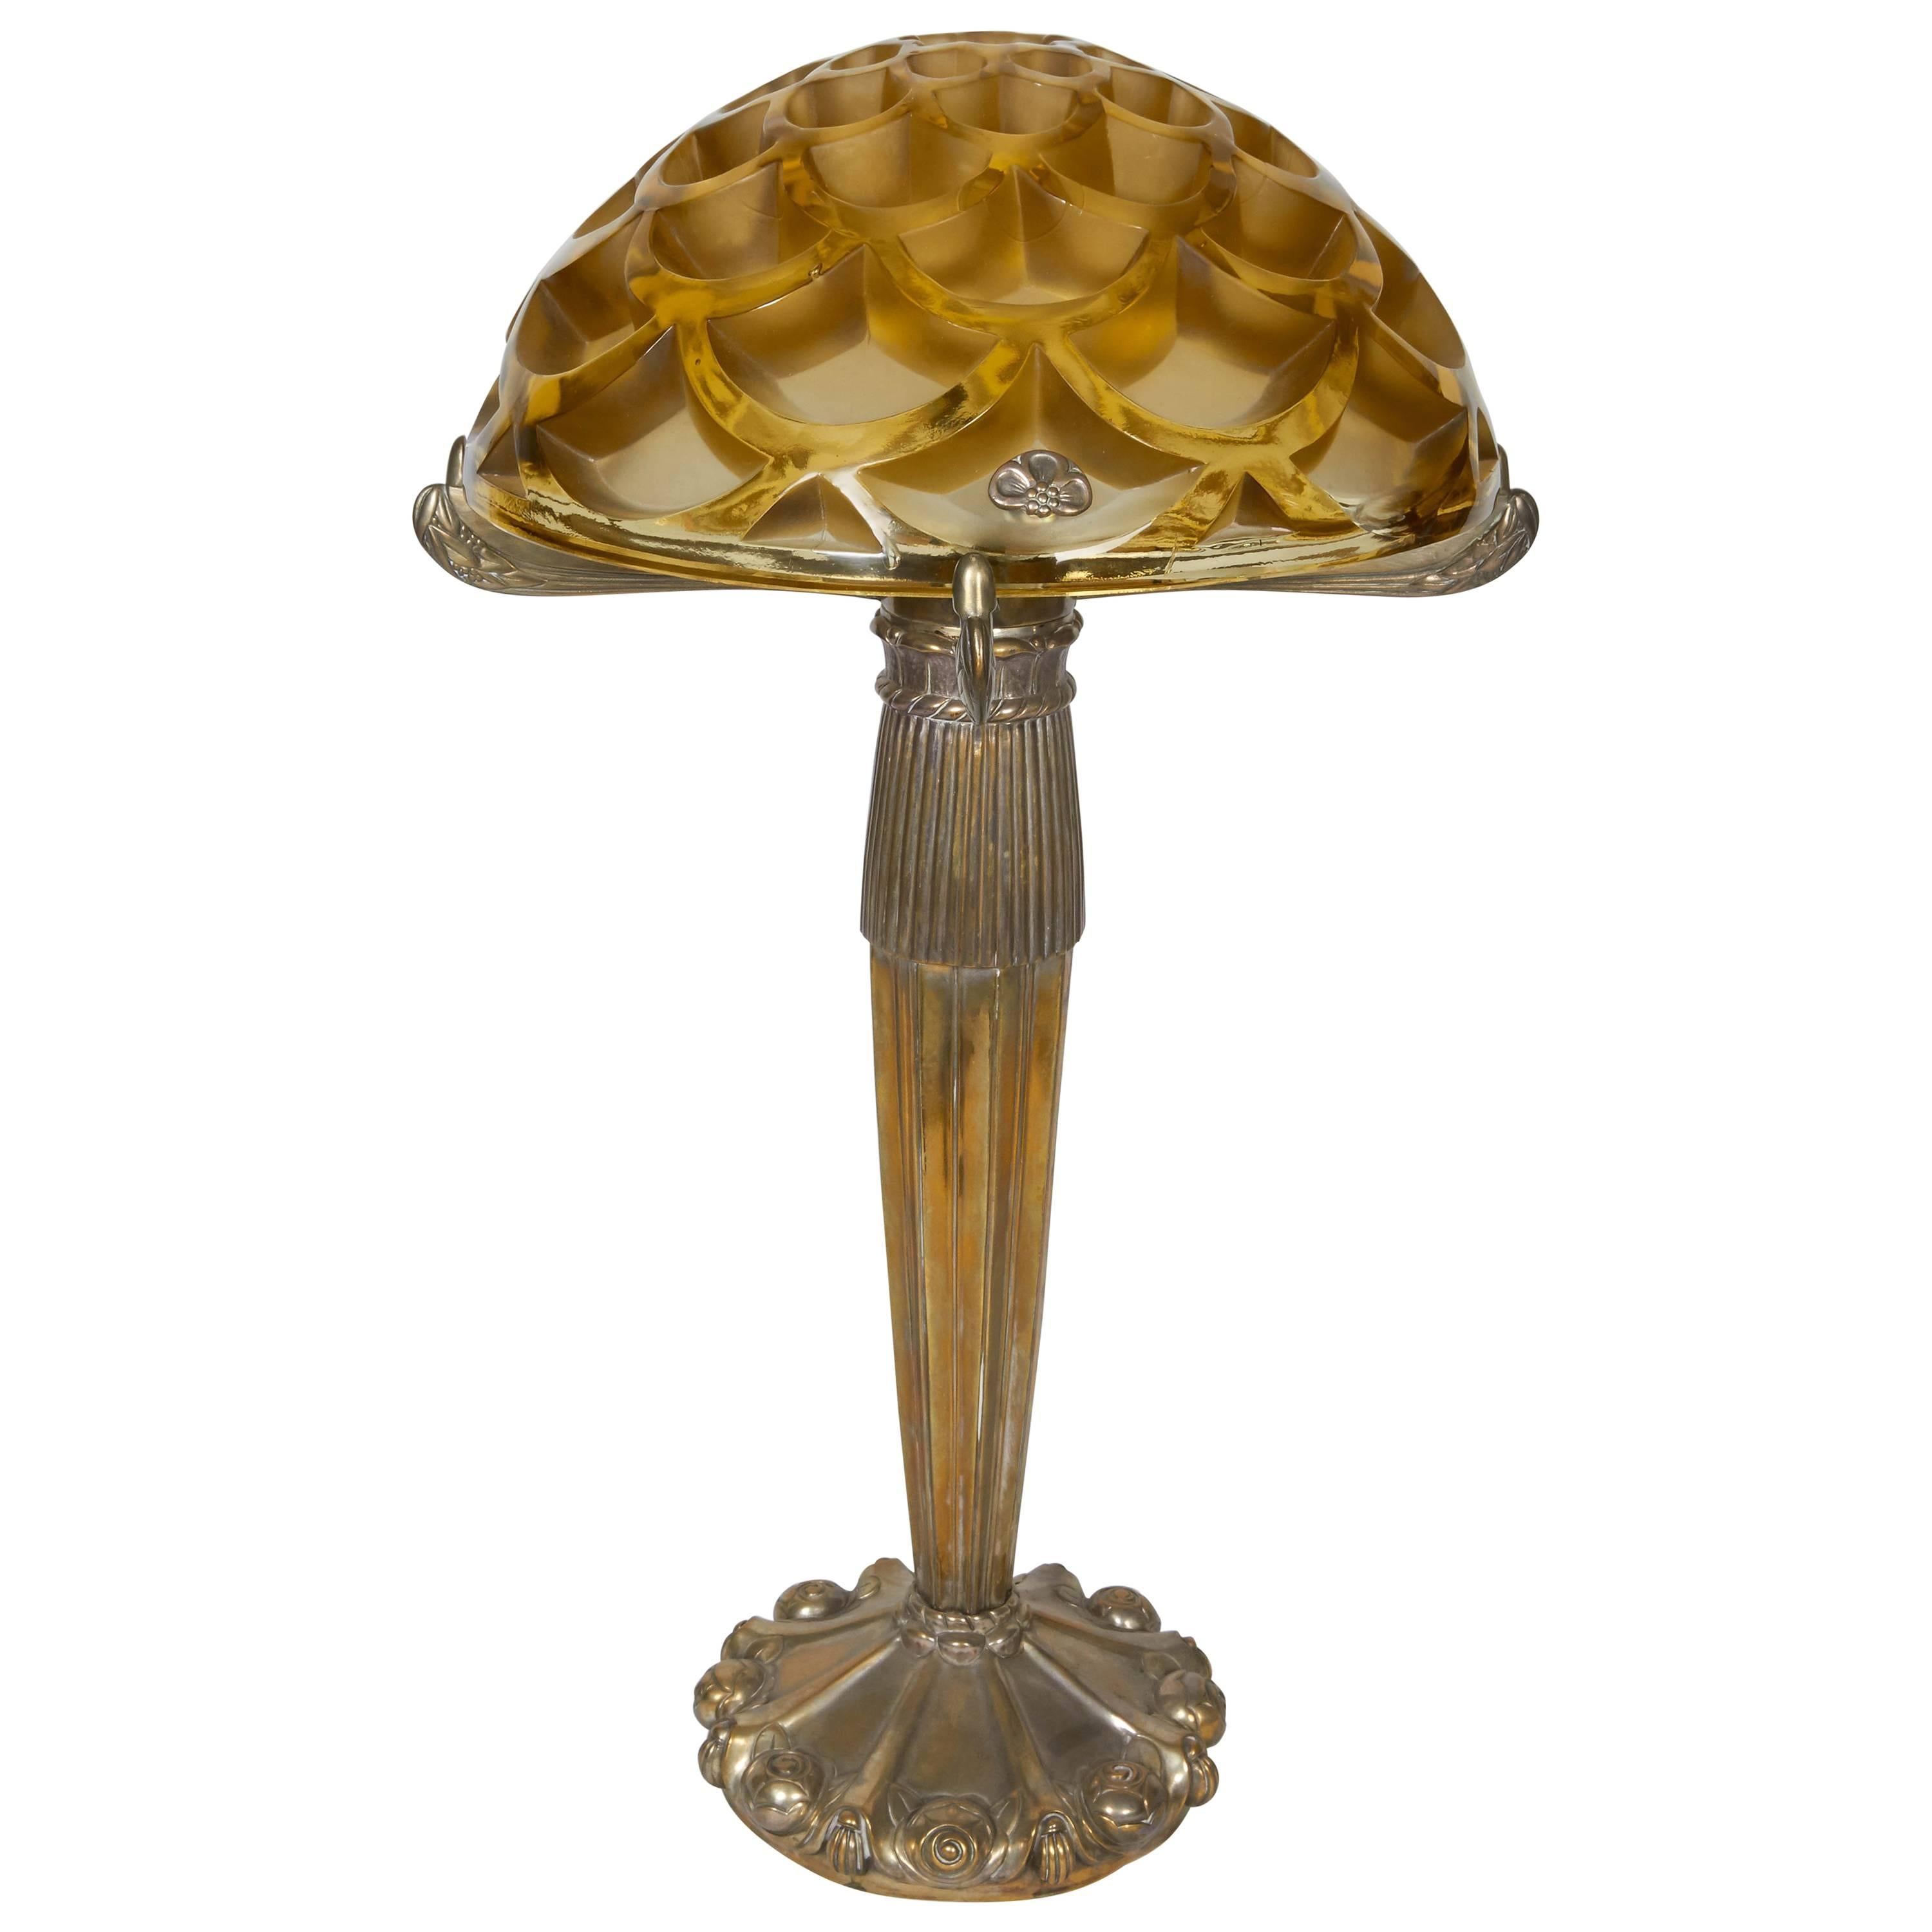 Table Lamp with a Rene Lalique "Rinceaux" Shade